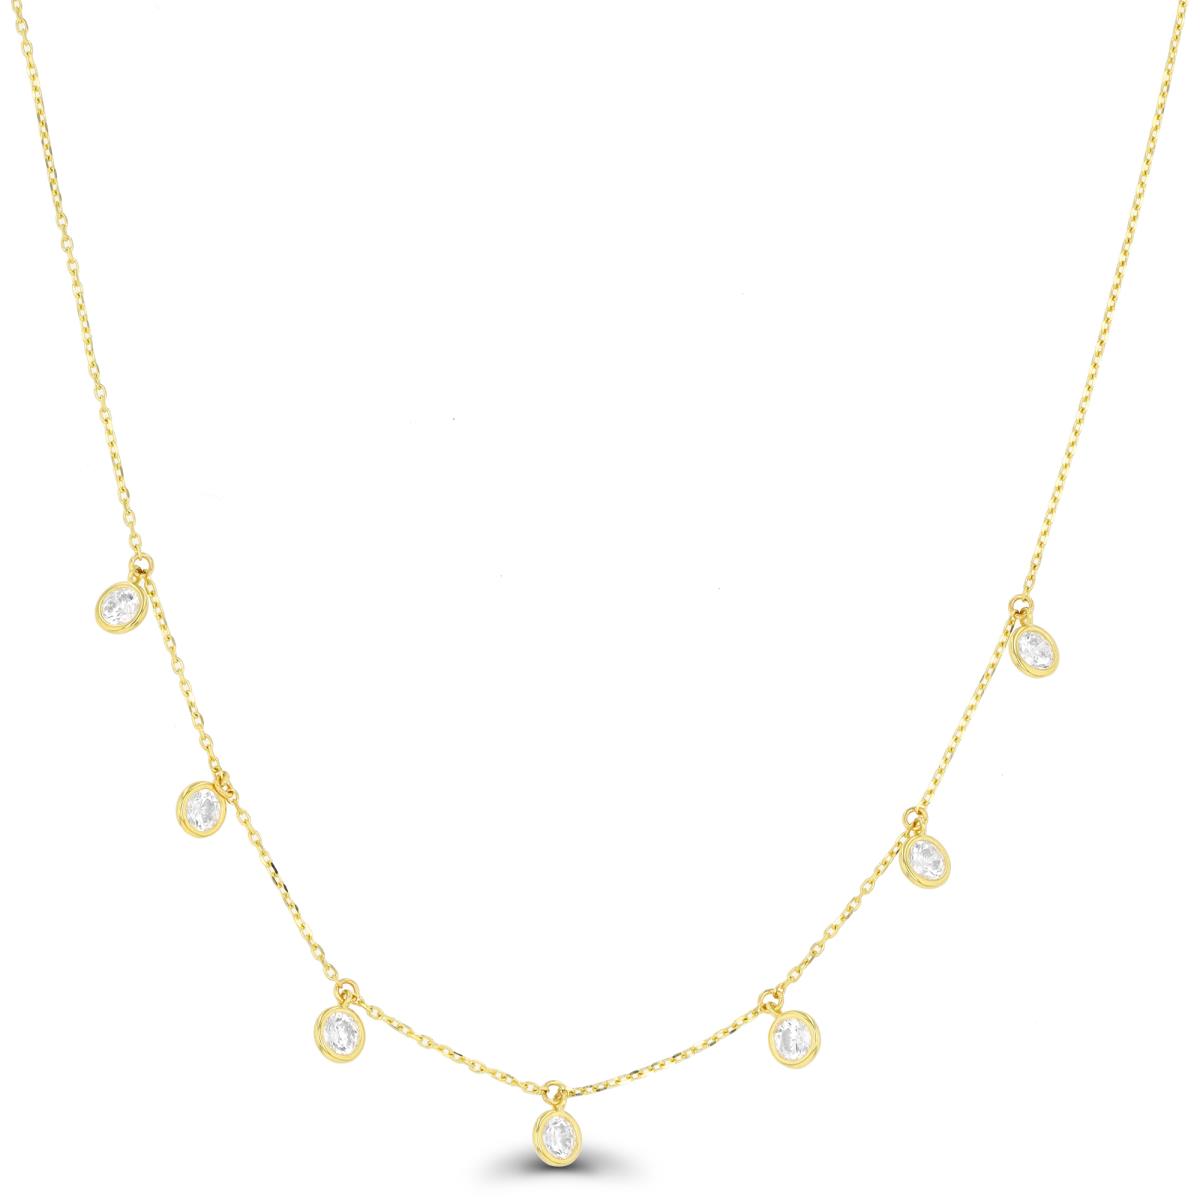 10K Yellow Gold 3mm Round Bezels 16"+2" Necklace